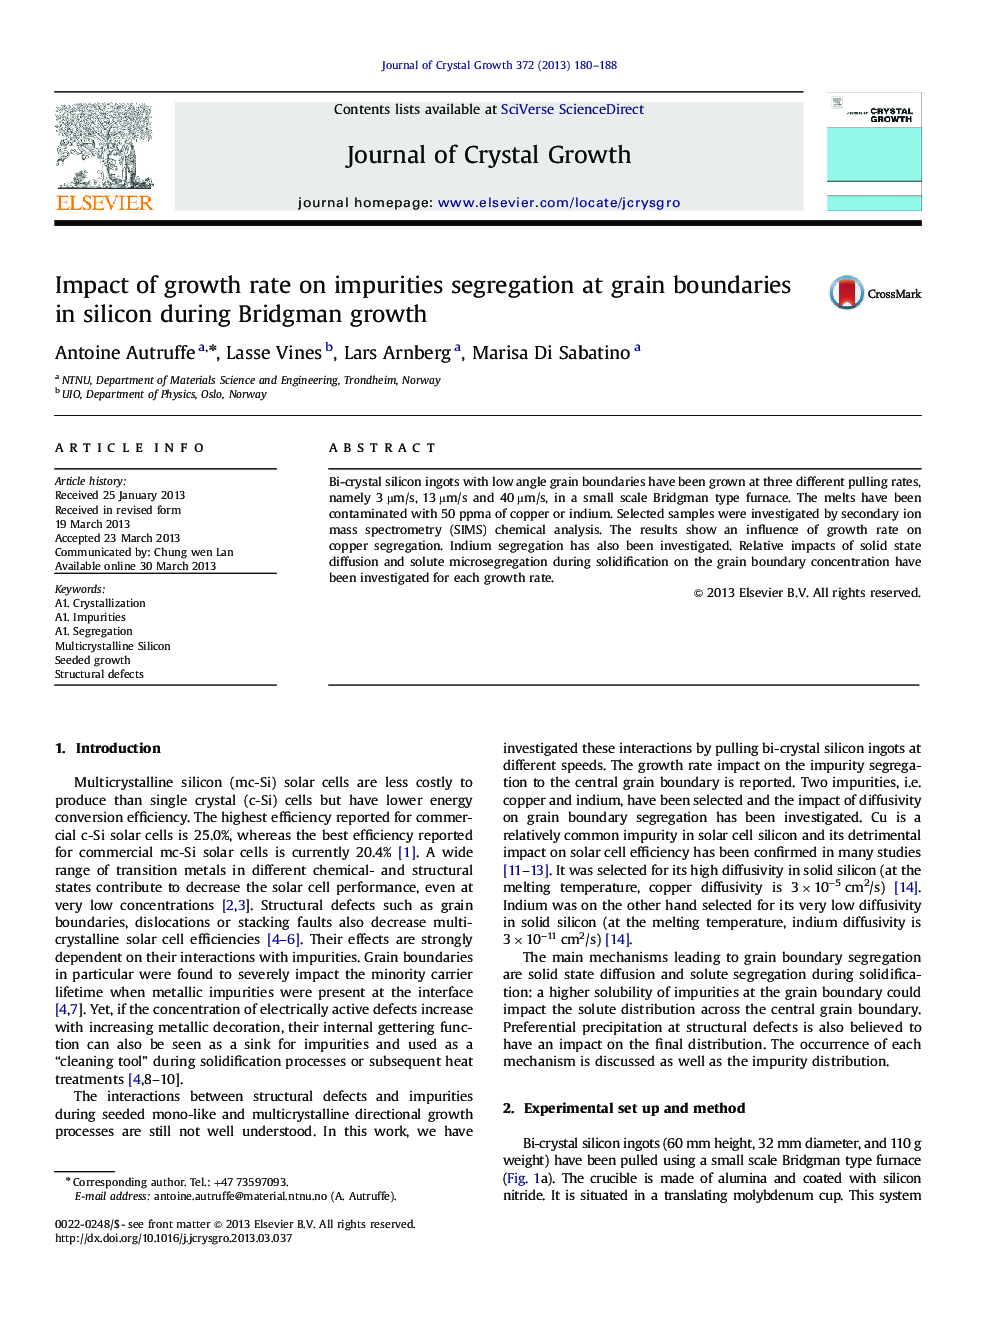 Impact of growth rate on impurities segregation at grain boundaries in silicon during Bridgman growth